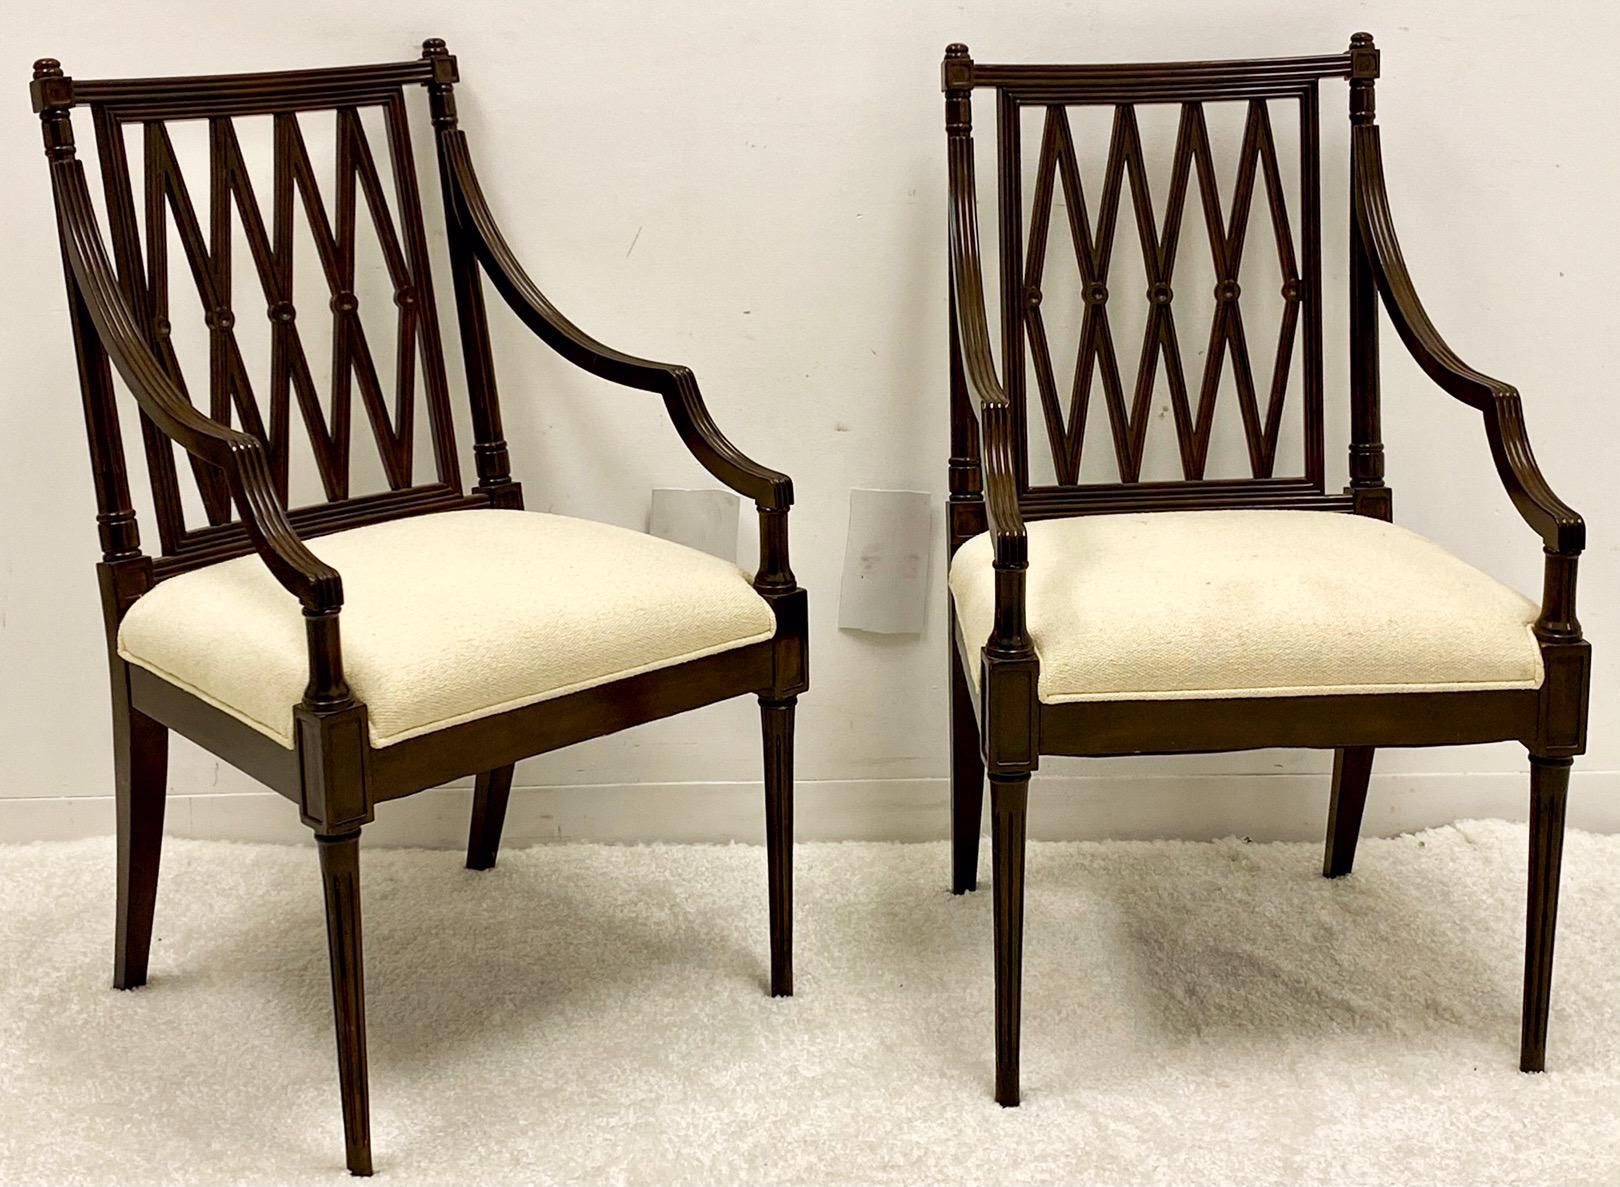 These wonderful regency style carved mahogany arm chairs have been recently upholstered in a neutral textured linen. They have tapered and fluted legs with lovely carved backs. They are unmarked. Measures: Arm;27”. Seat; 19”.